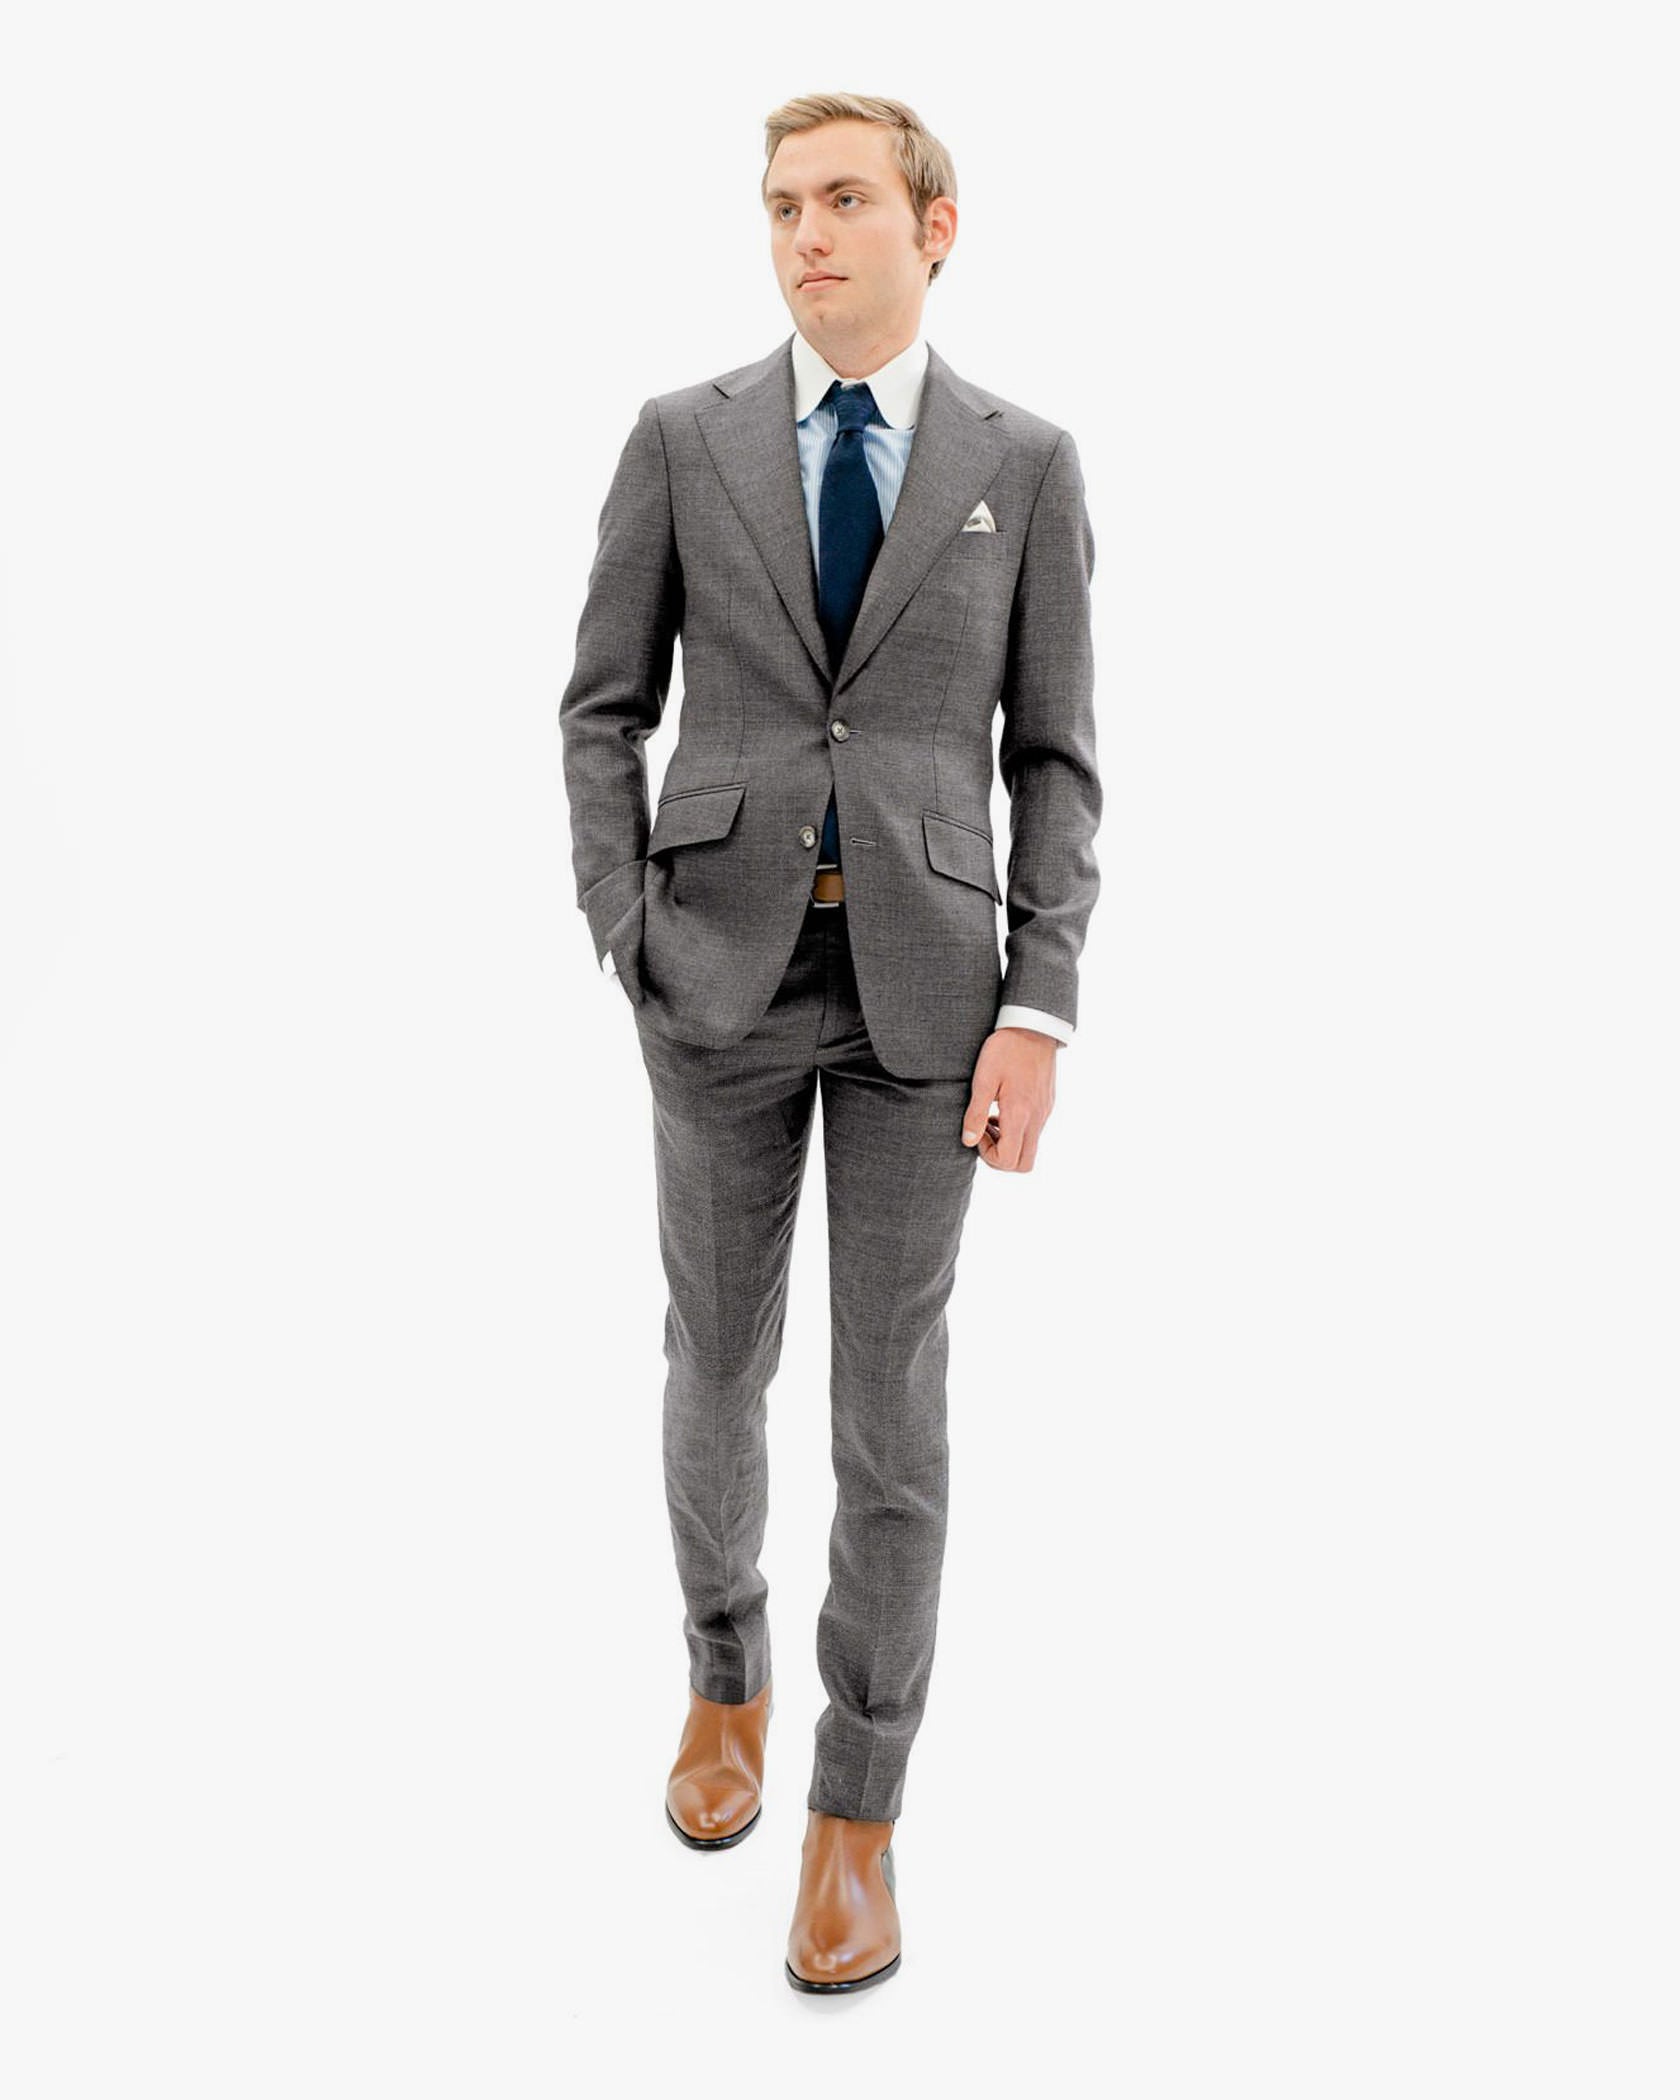 The Standard Grey Suit